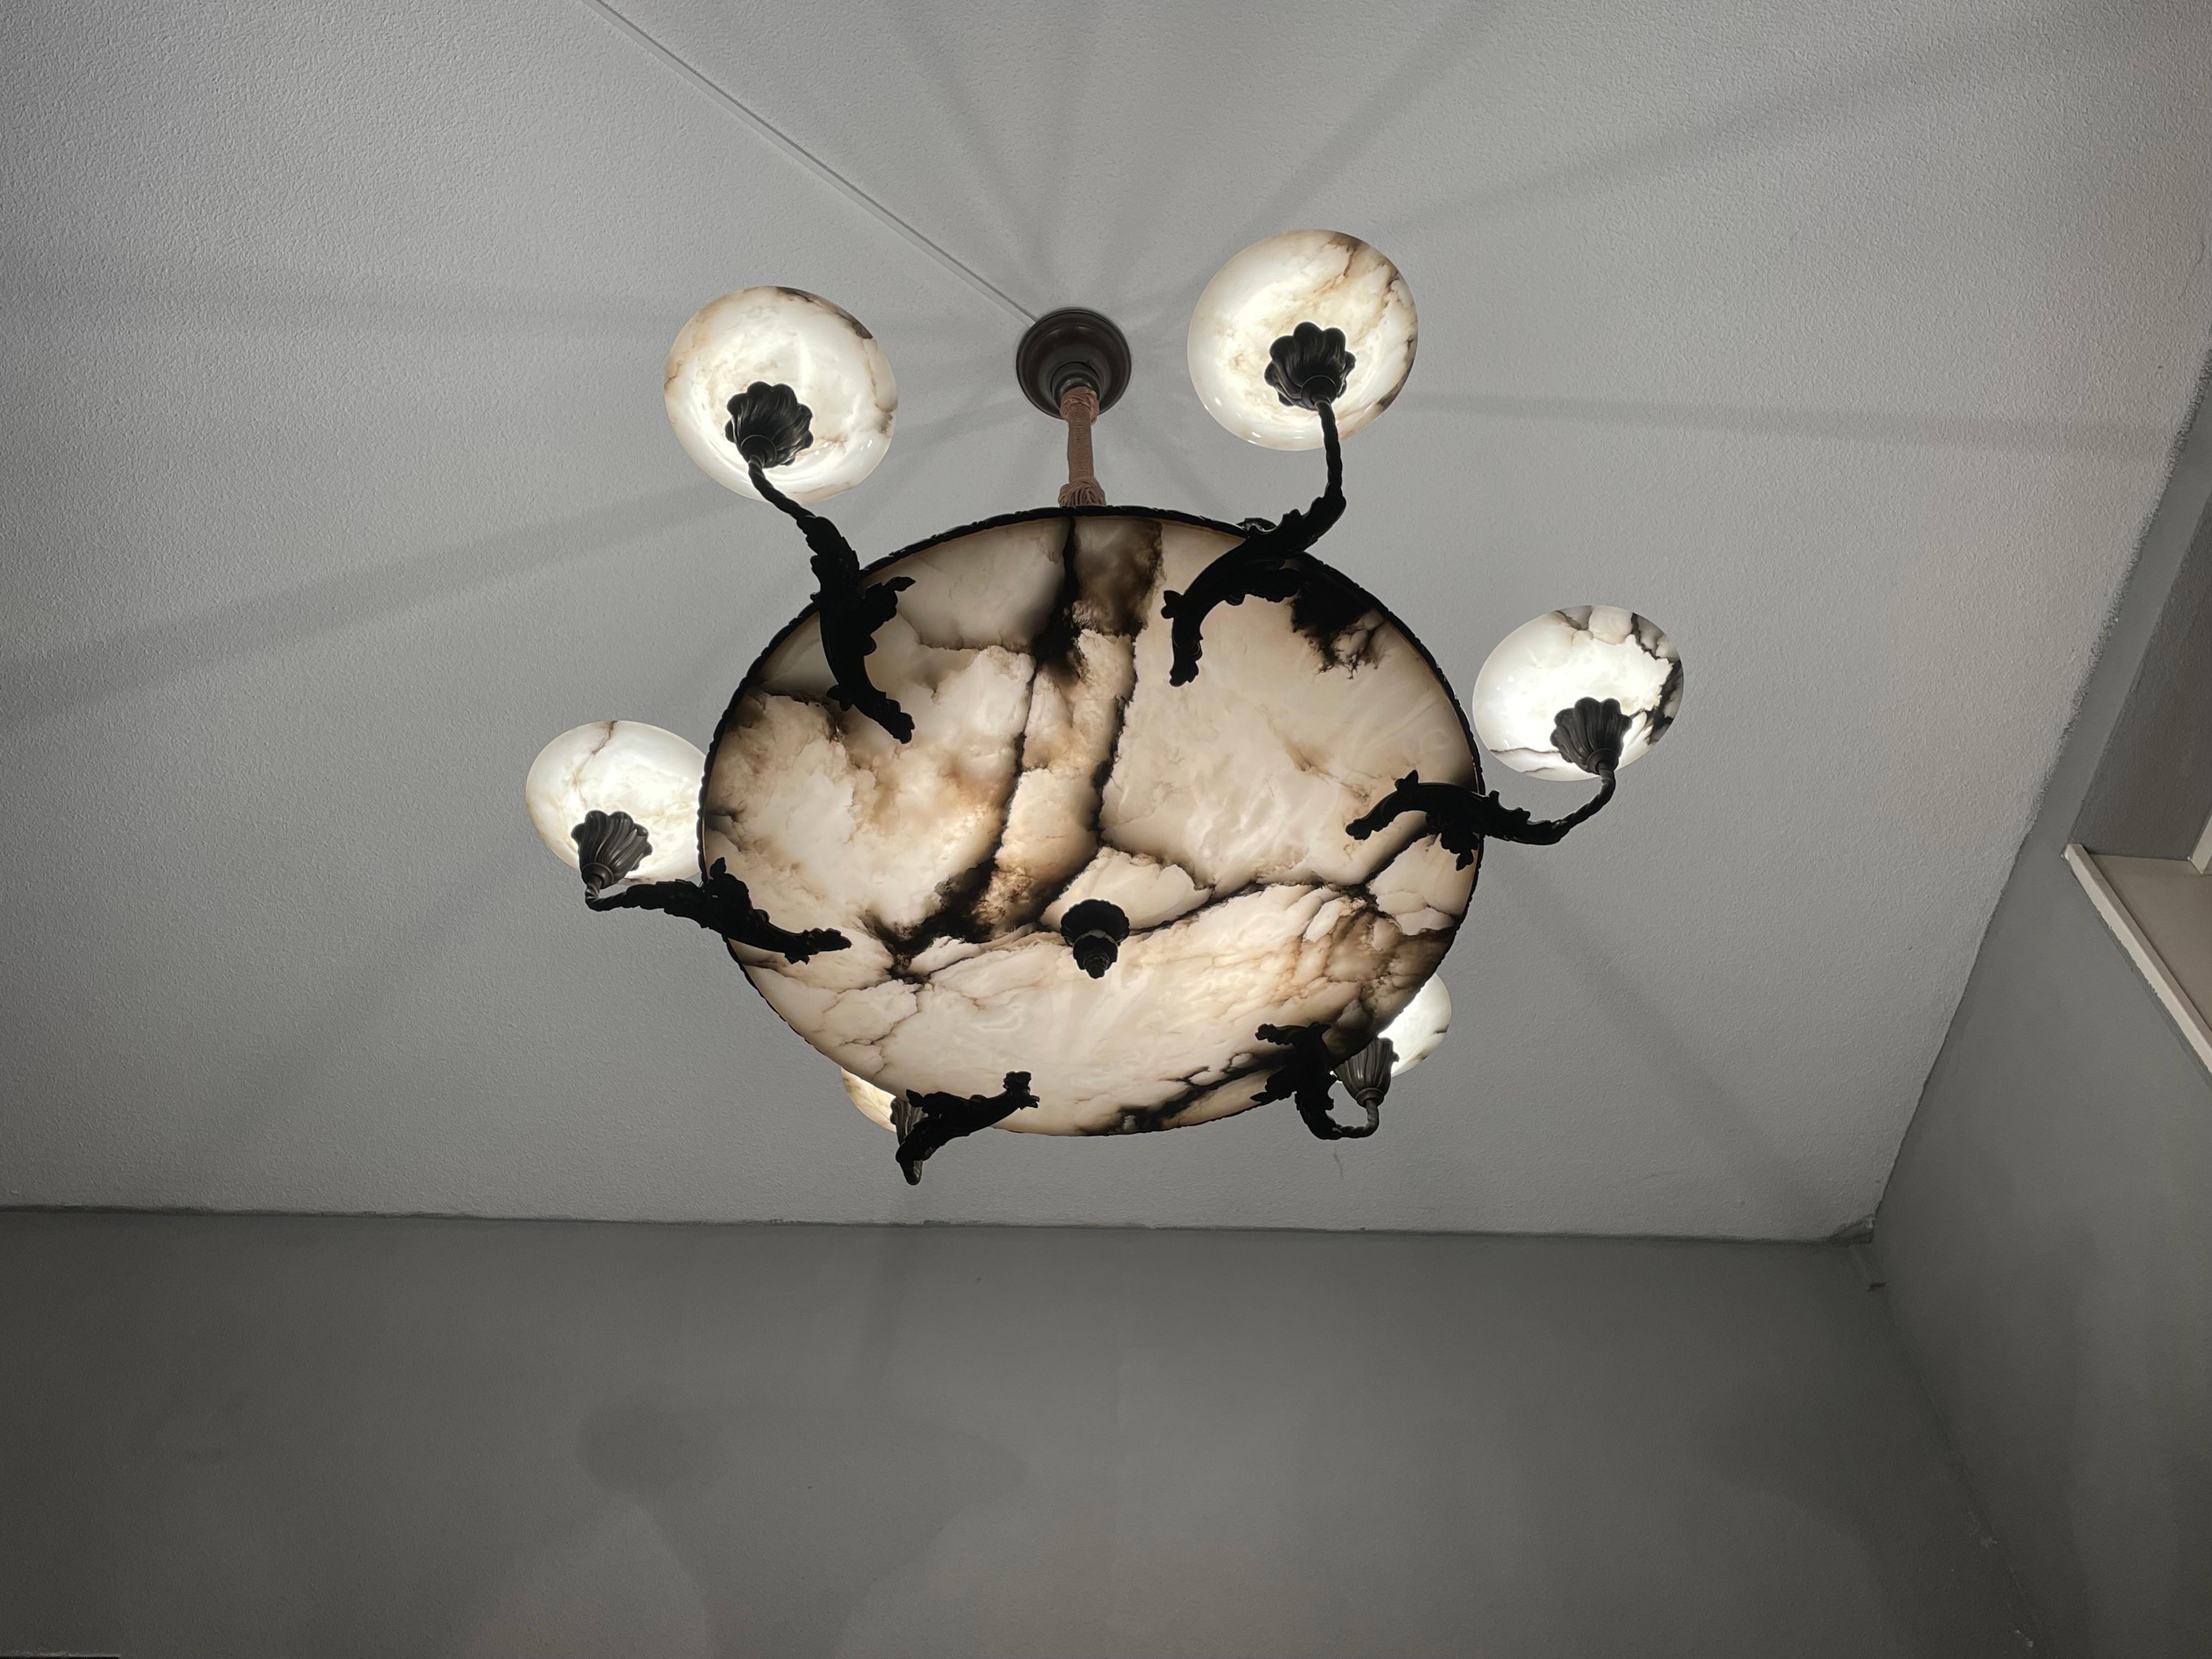 Stunning and extraordinary, 35 inches in diameter, 8-light antique chandelier.

If you are looking for a one of a kind and truly classy chandelier for a dining room, a hotel lobby, a large entry hall or any other spacious room that needs to radiate